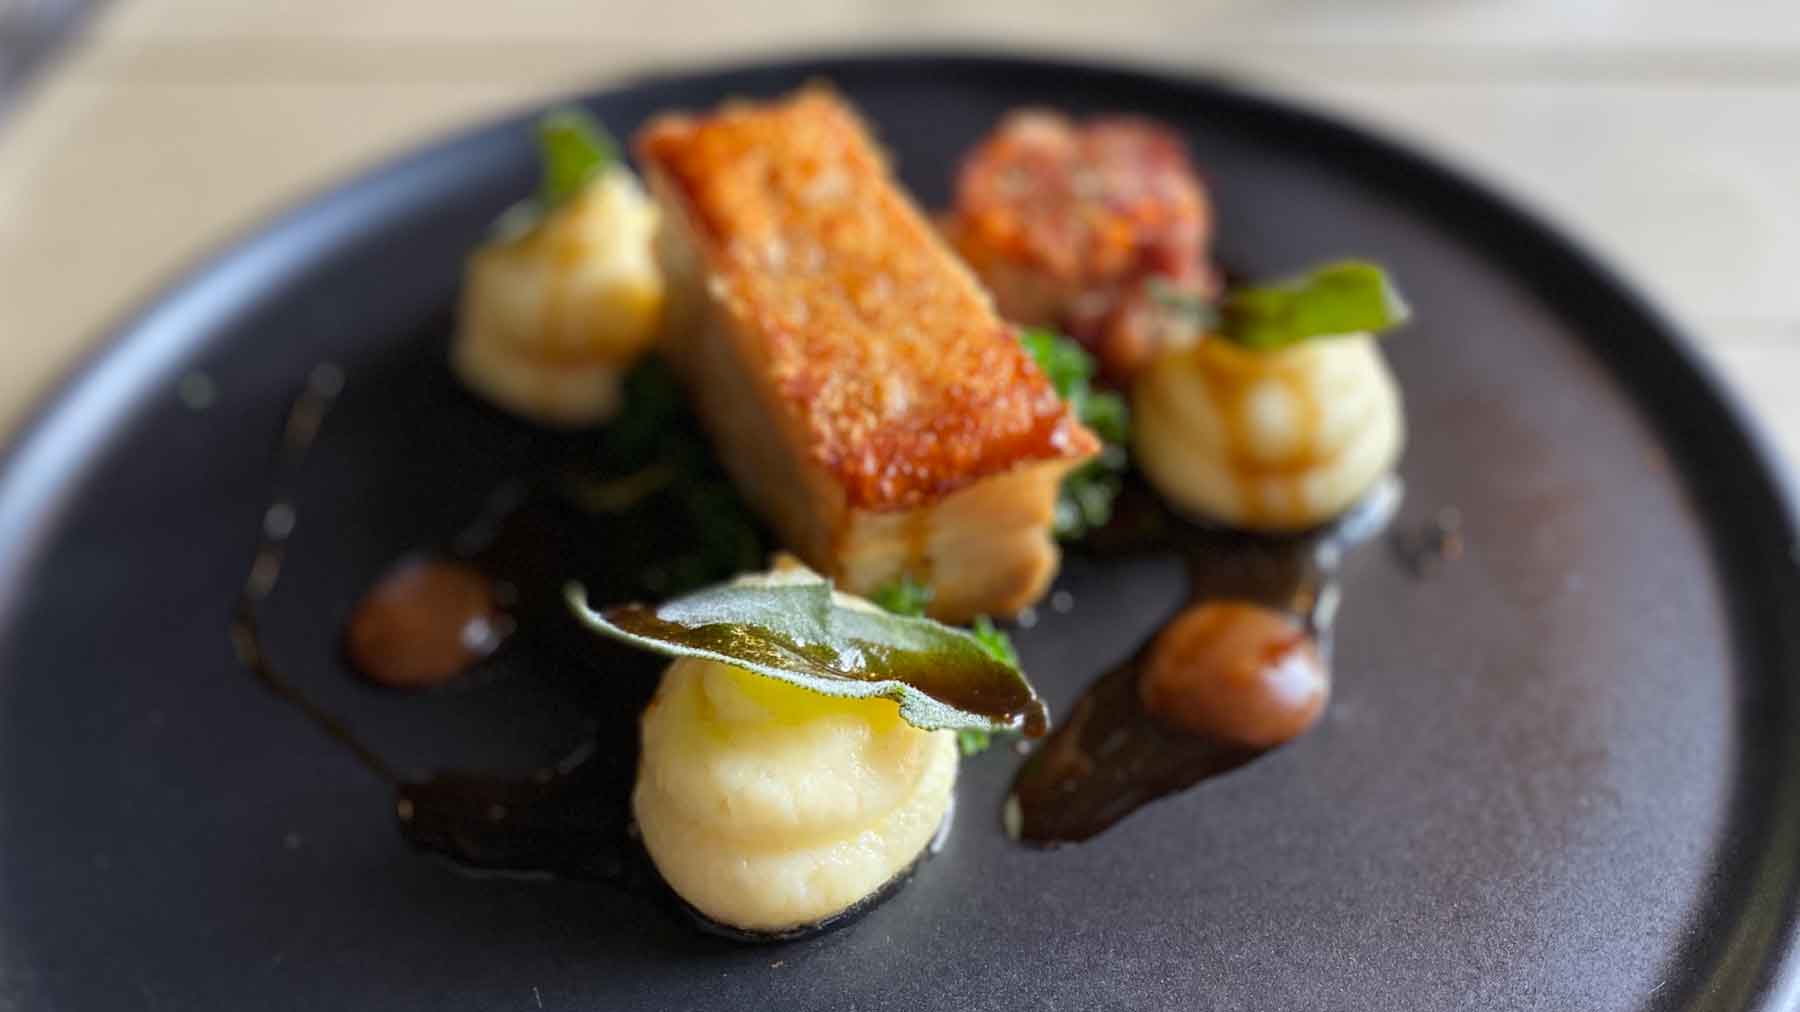 Beautifully prepared and presented pork belly dish at The George Alstonefield, Peak District